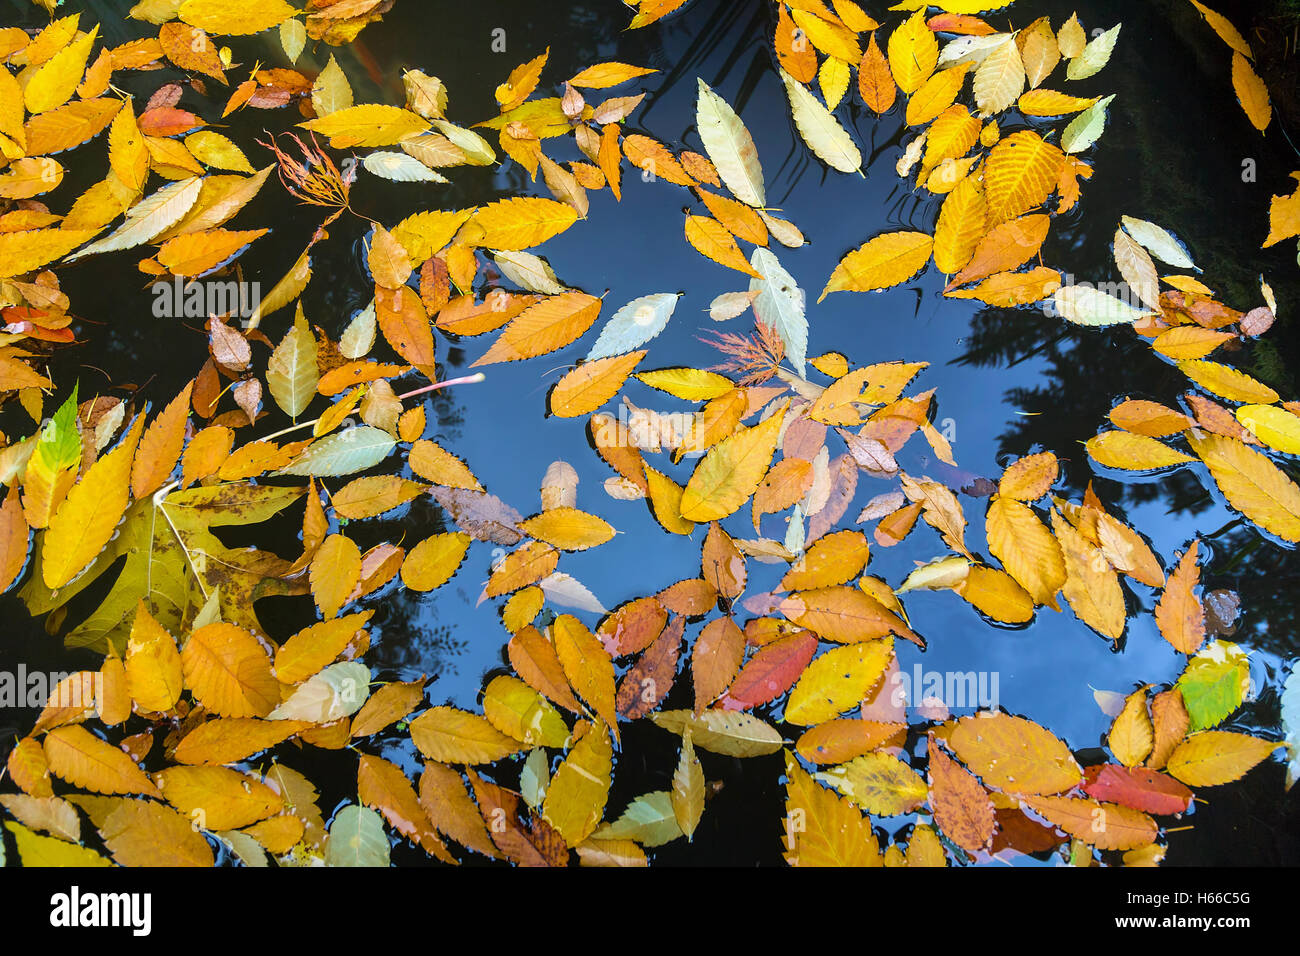 Colorful fall colors foliage leaves floating in garden pond in Autumn Stock Photo